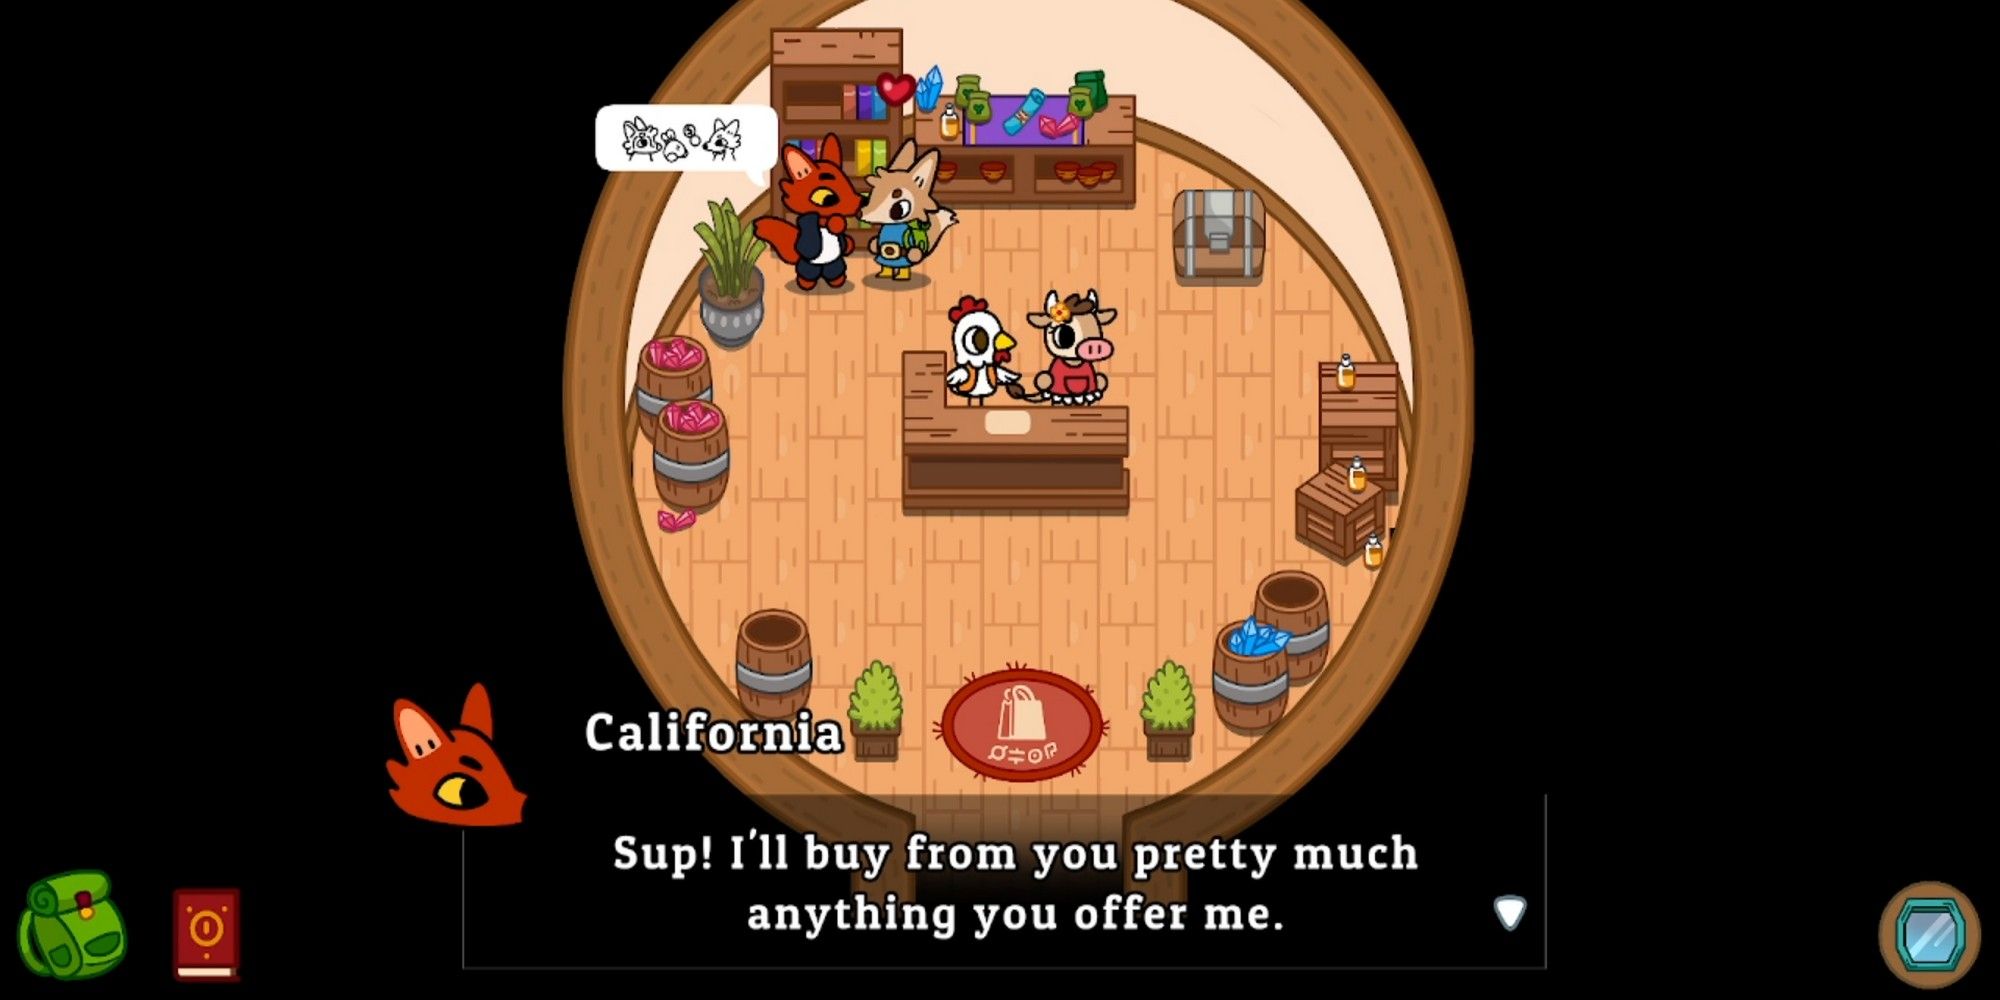 ken talking to california in the shop to sell items in lonesome village